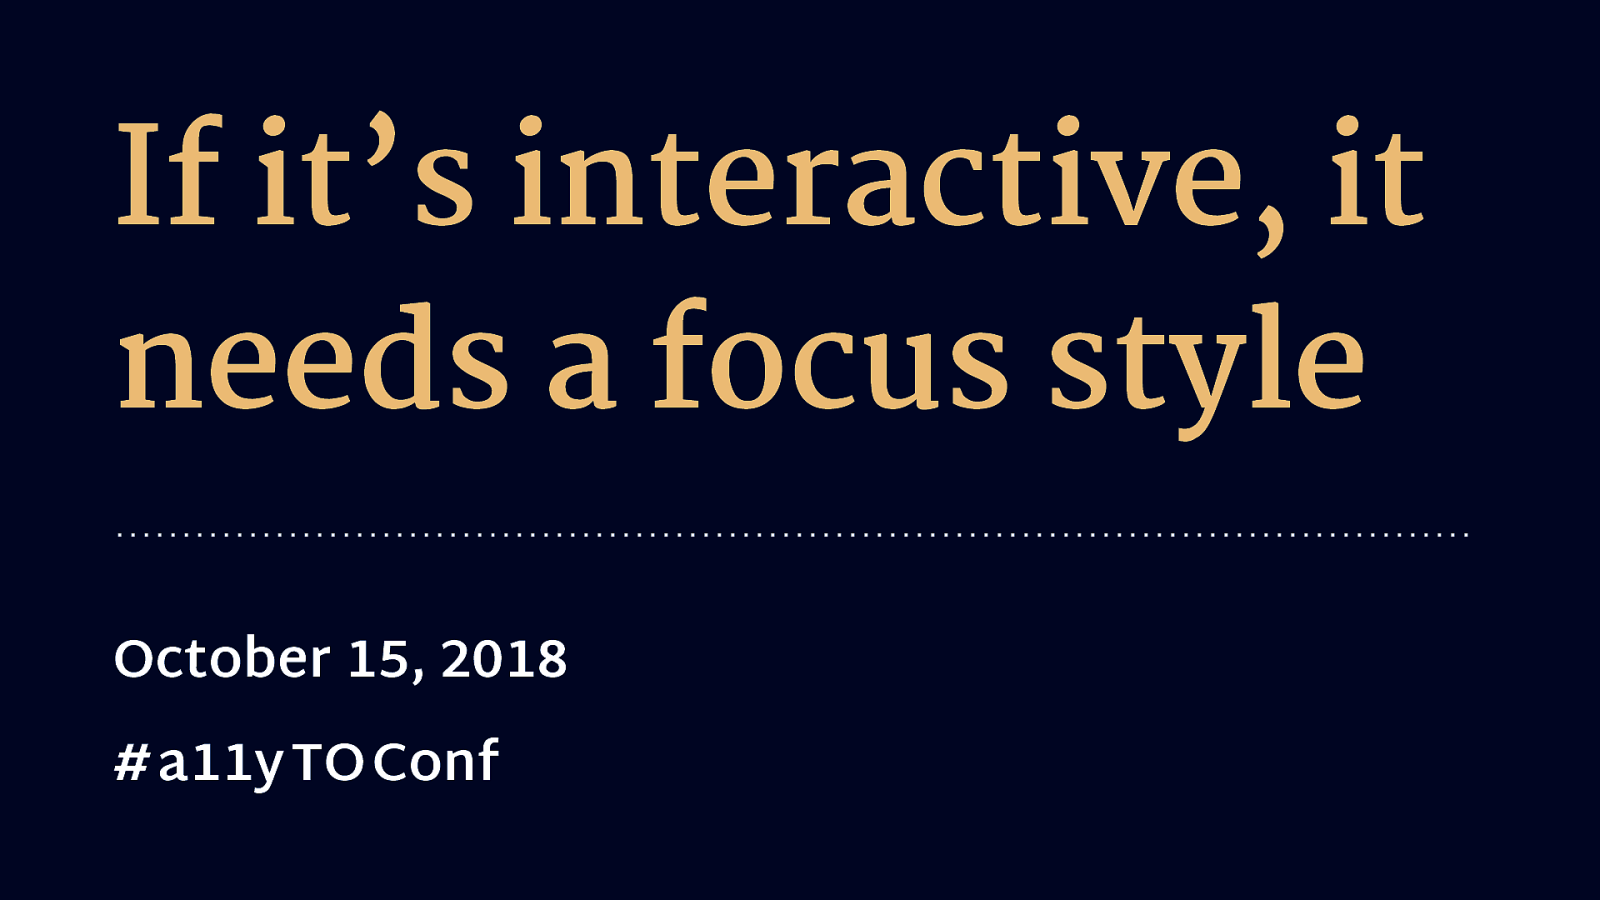 If it’s interactive, it needs a focus style